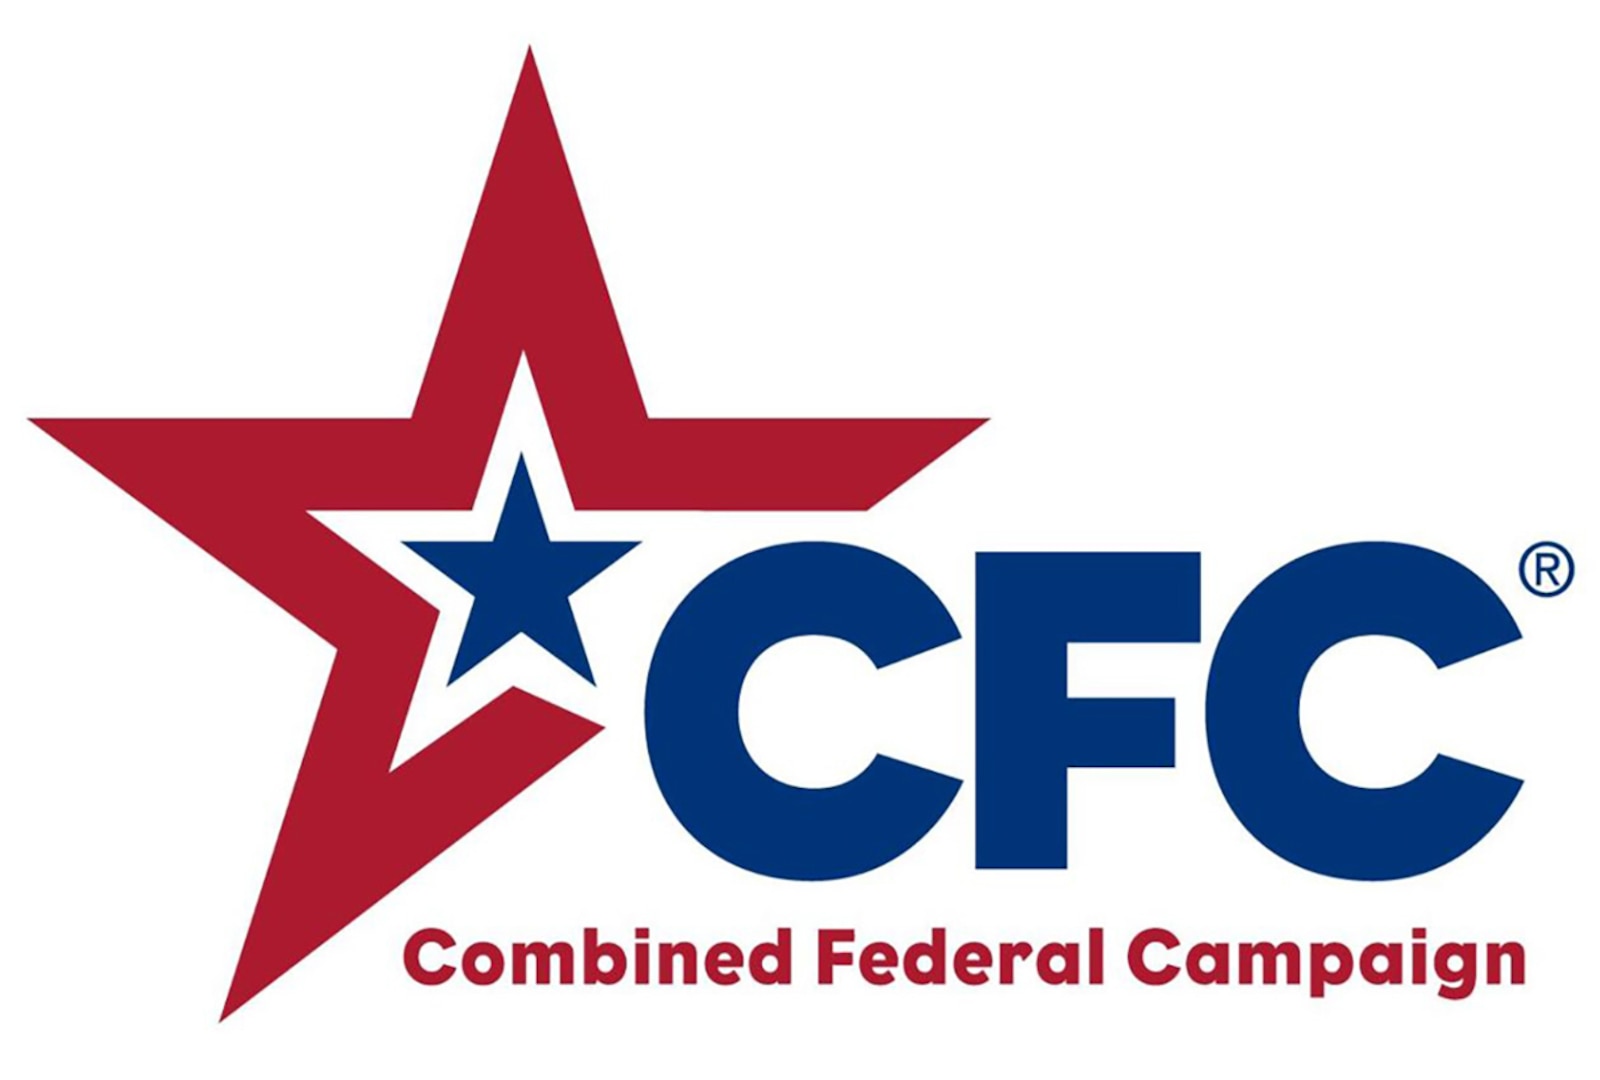 Since the official kick-off for the Combined Federal Campaign on Oct. 3, the Defense Logistics Agency has reached more than 30 percent of its fundraising goal of $315,000.